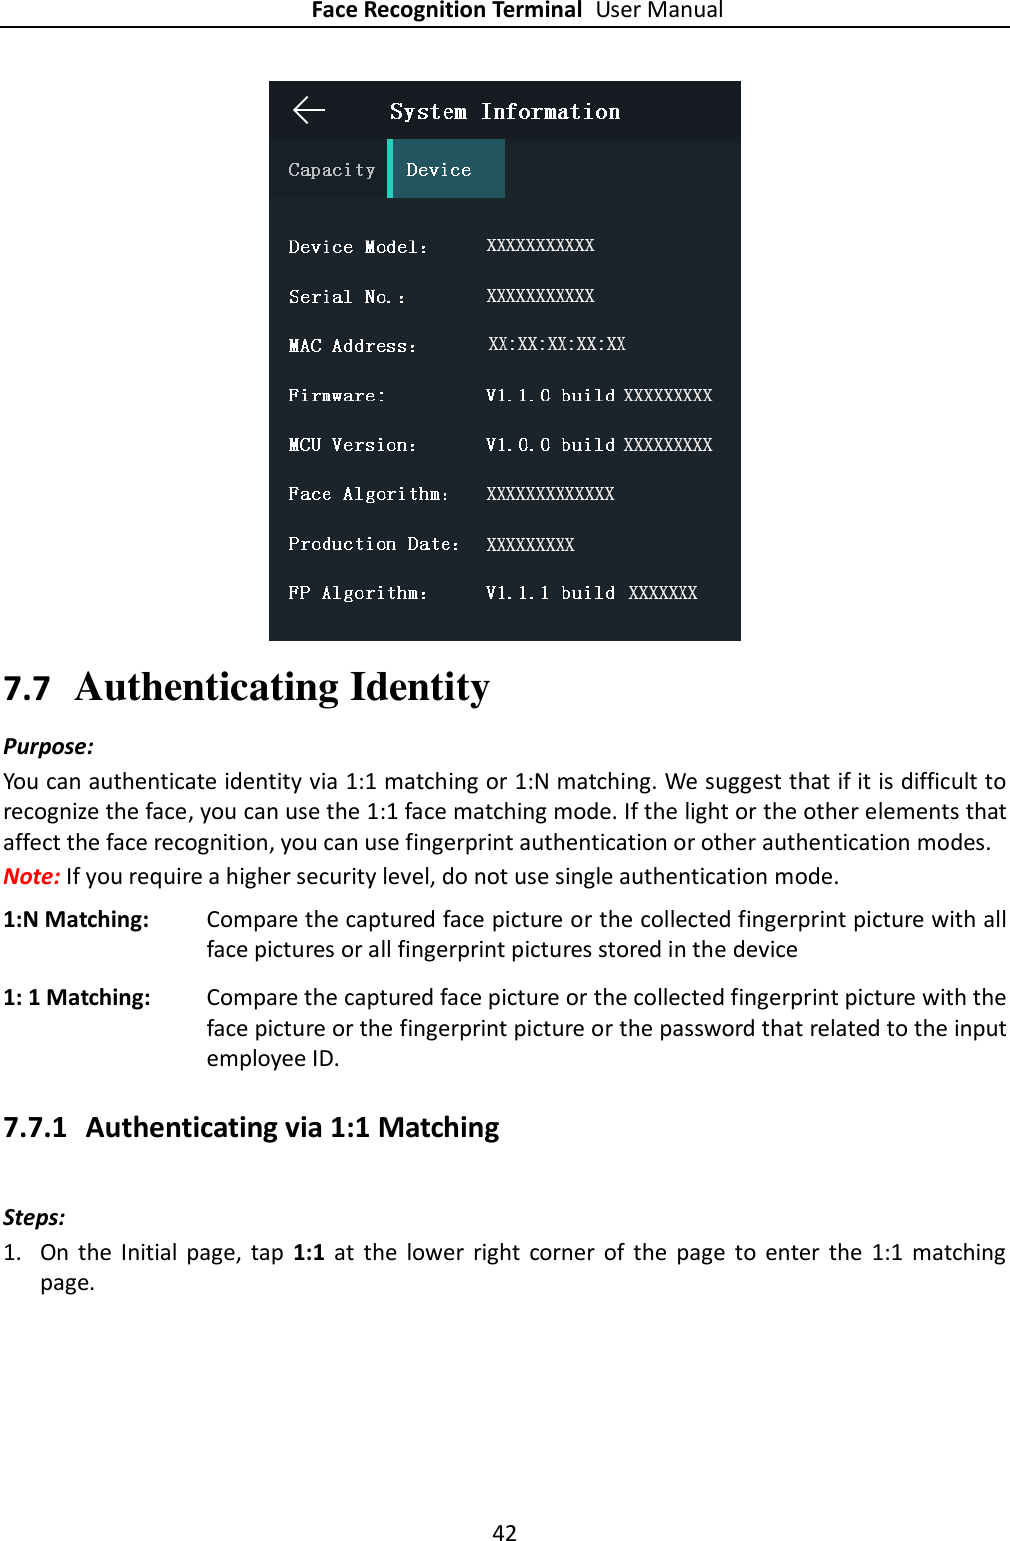 Face Recognition Terminal User Manual 42   7.7 Authenticating Identity Purpose: You can authenticate identity via 1:1 matching or 1:N matching. We suggest that if it is difficult to recognize the face, you can use the 1:1 face matching mode. If the light or the other elements that affect the face recognition, you can use fingerprint authentication or other authentication modes. Note: If you require a higher security level, do not use single authentication mode. 1:N Matching: Compare the captured face picture or the collected fingerprint picture with all face pictures or all fingerprint pictures stored in the device 1: 1 Matching: Compare the captured face picture or the collected fingerprint picture with the face picture or the fingerprint picture or the password that related to the input employee ID. 7.7.1 Authenticating via 1:1 Matching Steps:   1. On  the  Initial  page,  tap  1:1  at  the  lower  right  corner  of  the  page  to  enter  the  1:1  matching page. 